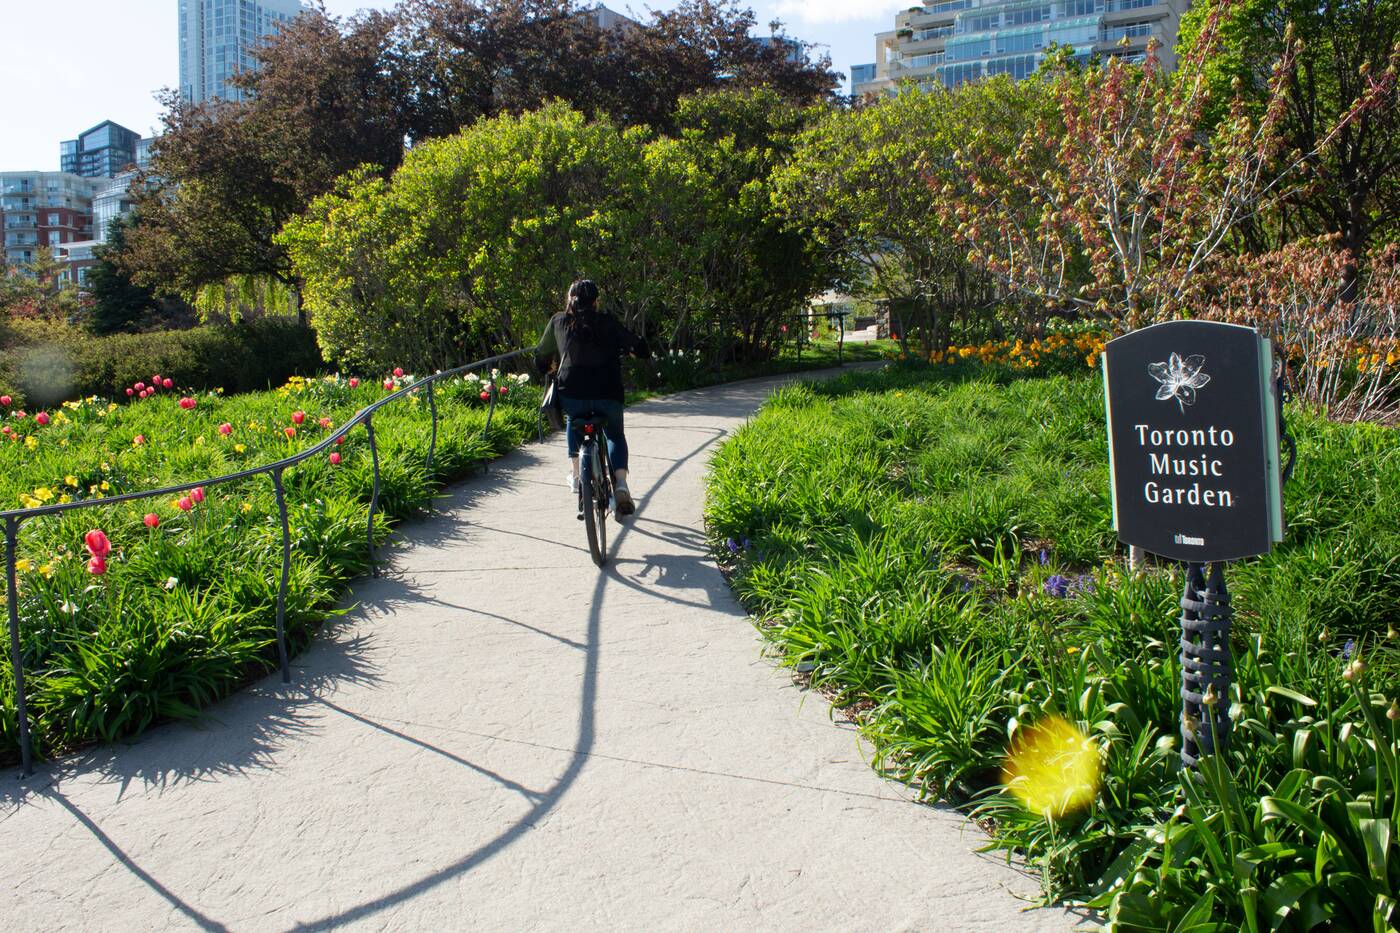 Toronto Music Garden Is The Serene Bach Inspired Park By The